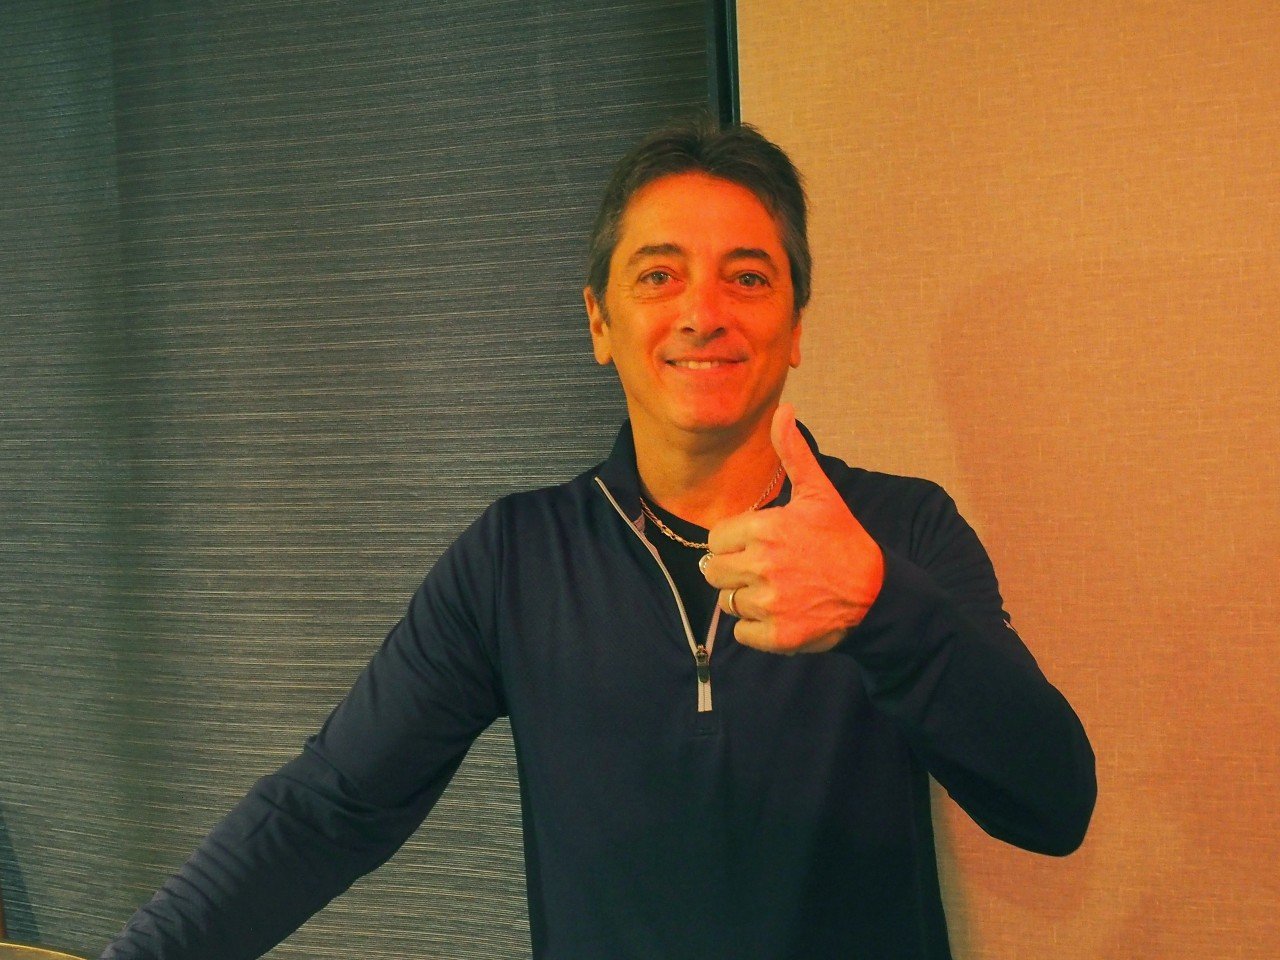 Scott Baio played Charles in 'Charles in Charge.'